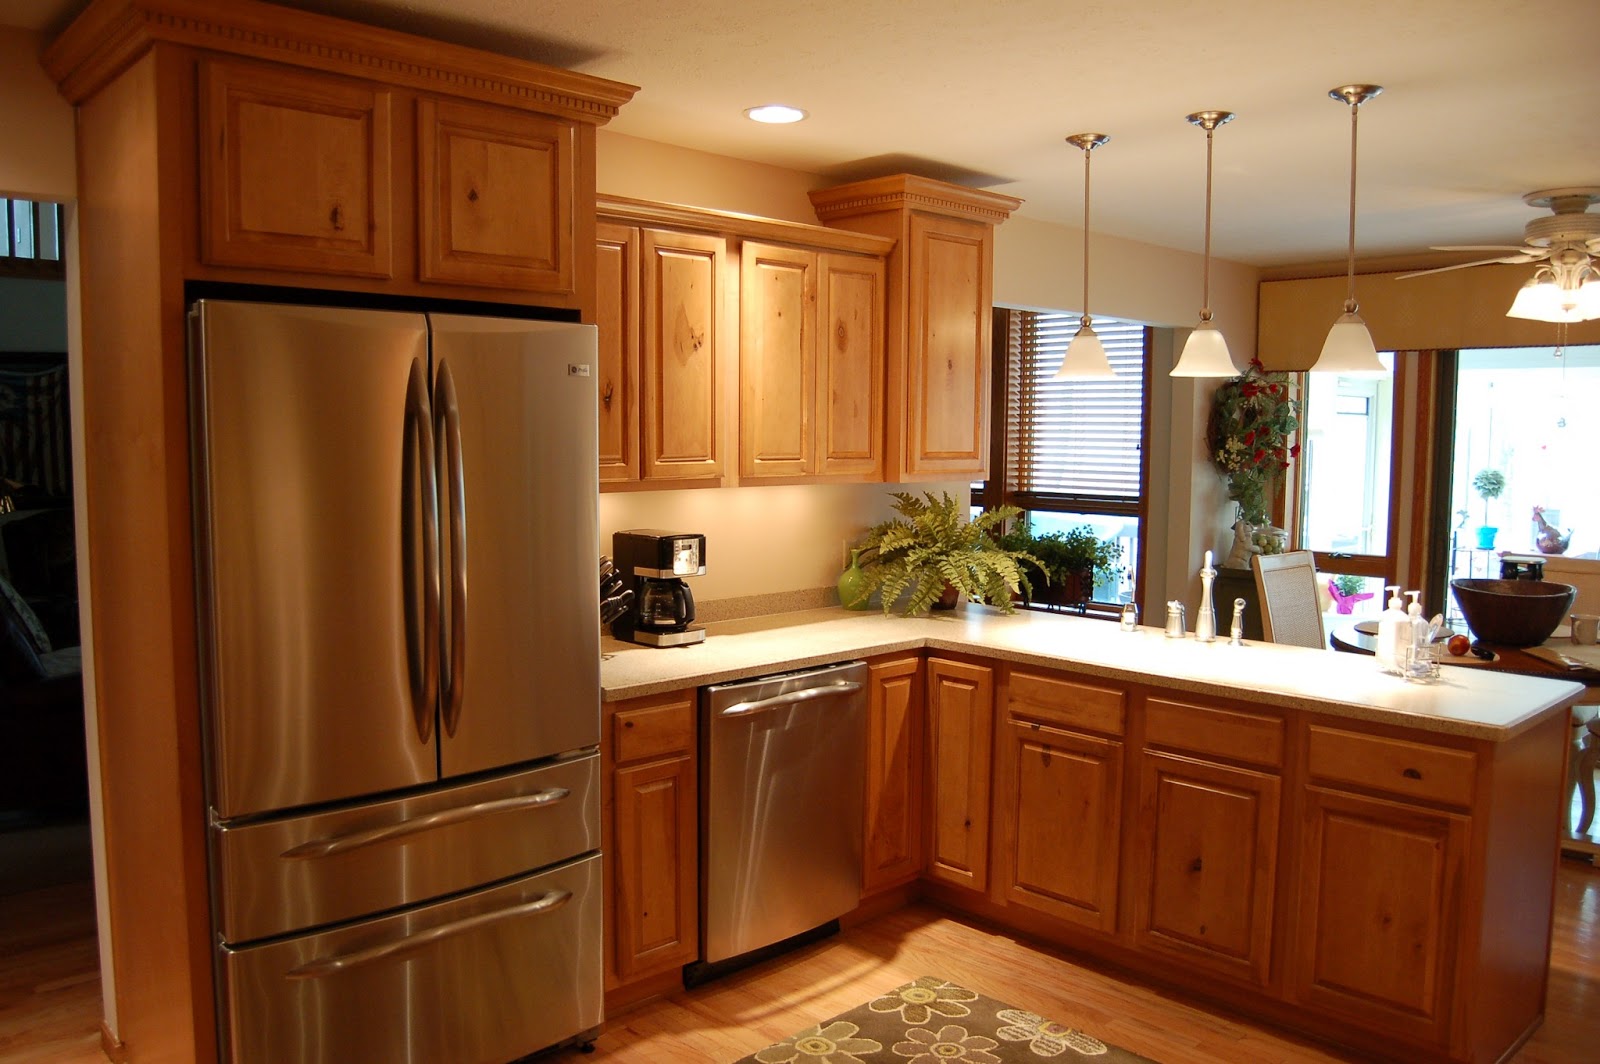 Chicago Kitchen Remodeling Ideas: Kitchen Remodeling Chicago